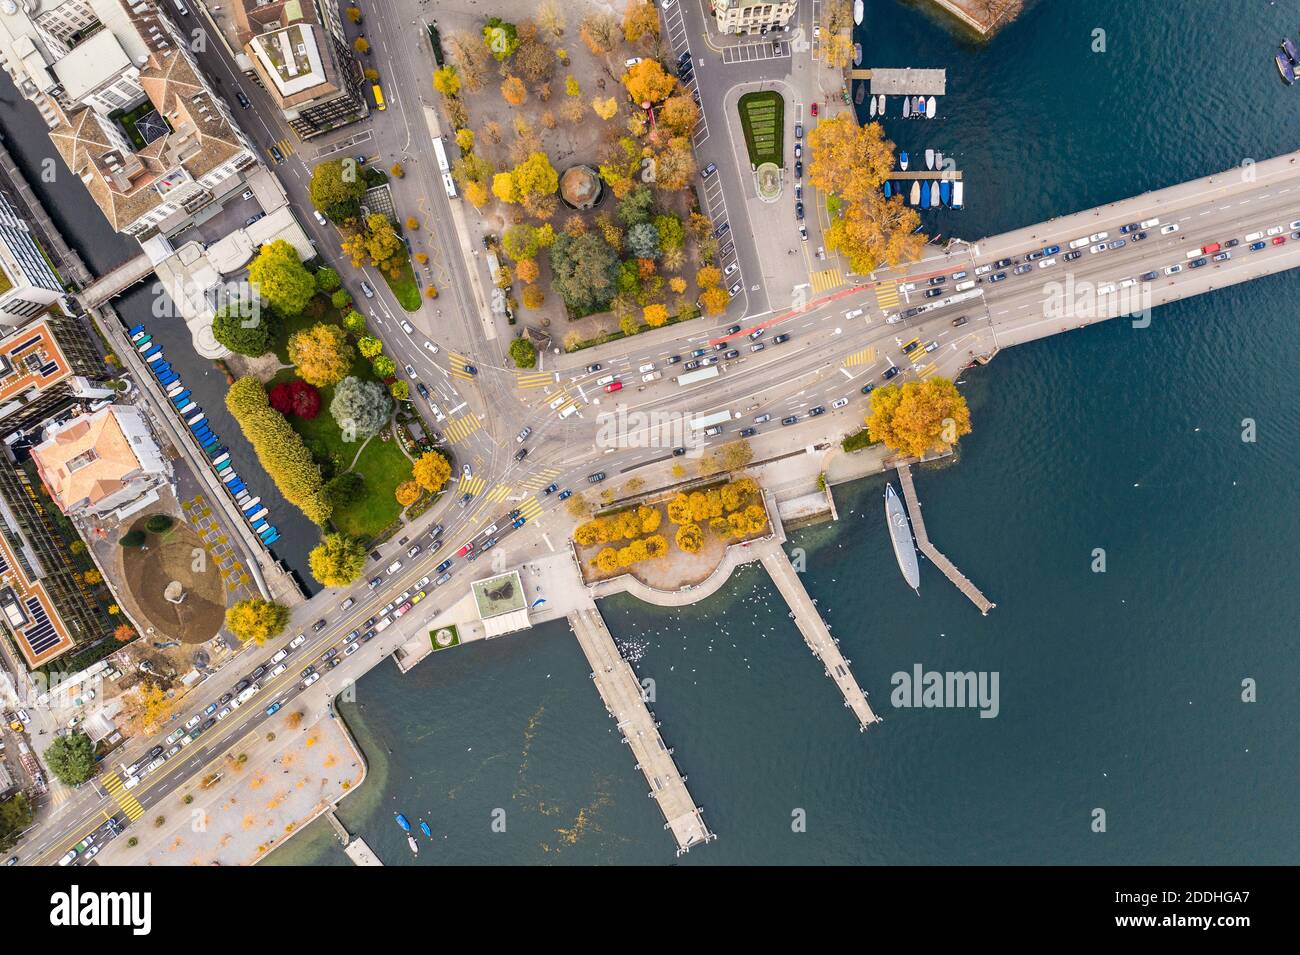 Top down aerial view of the Zurich waterfront area where the Limmat river meets lake Zurich in Switzerland Stock Photo